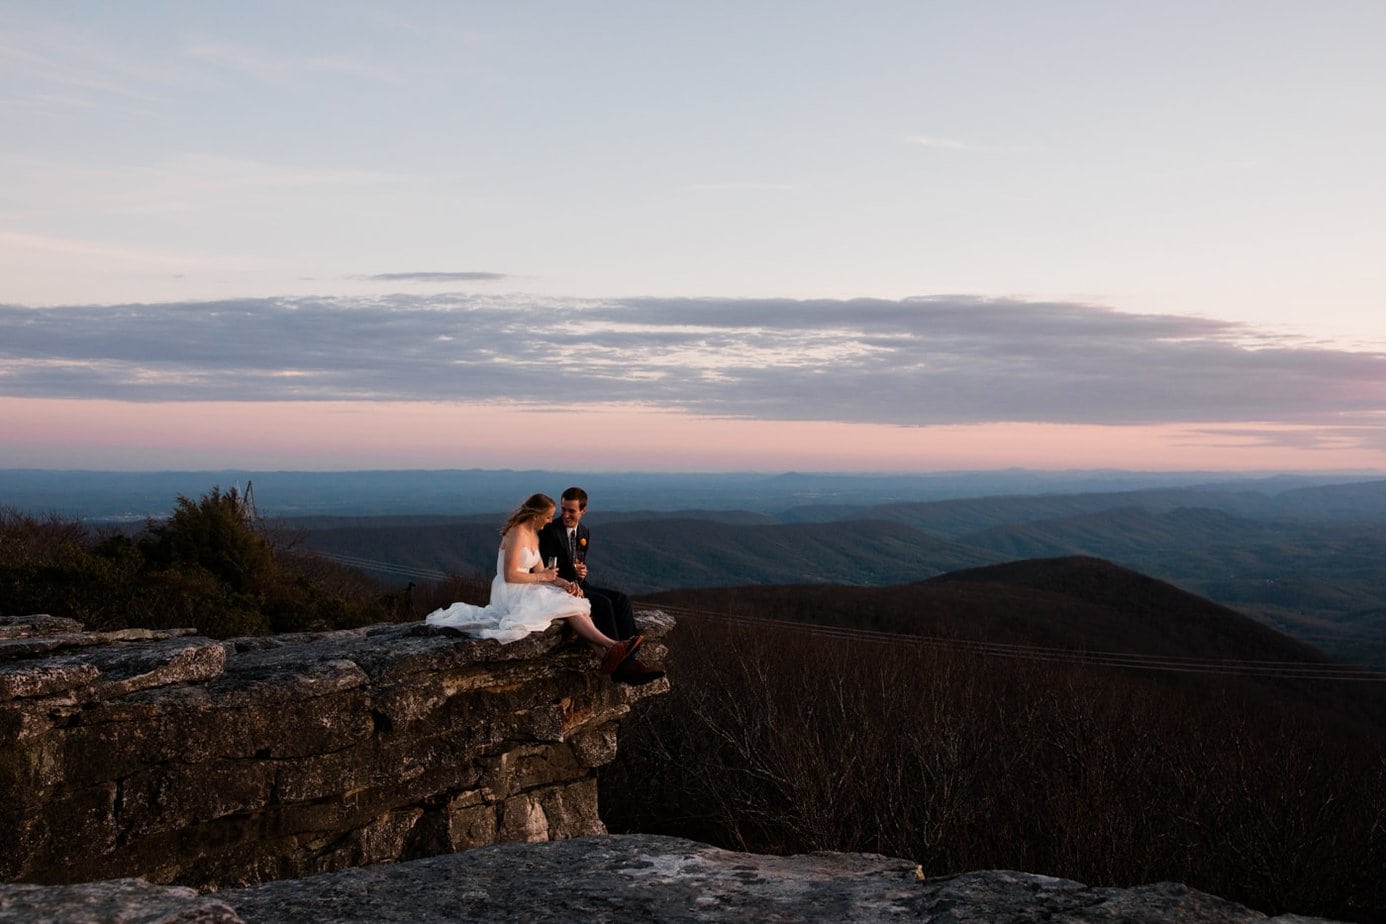 A woman and man wearing wedding garb sit on a cliff drinking champagne. A sunset is in the sky behind them and mountains can be seen in the distance